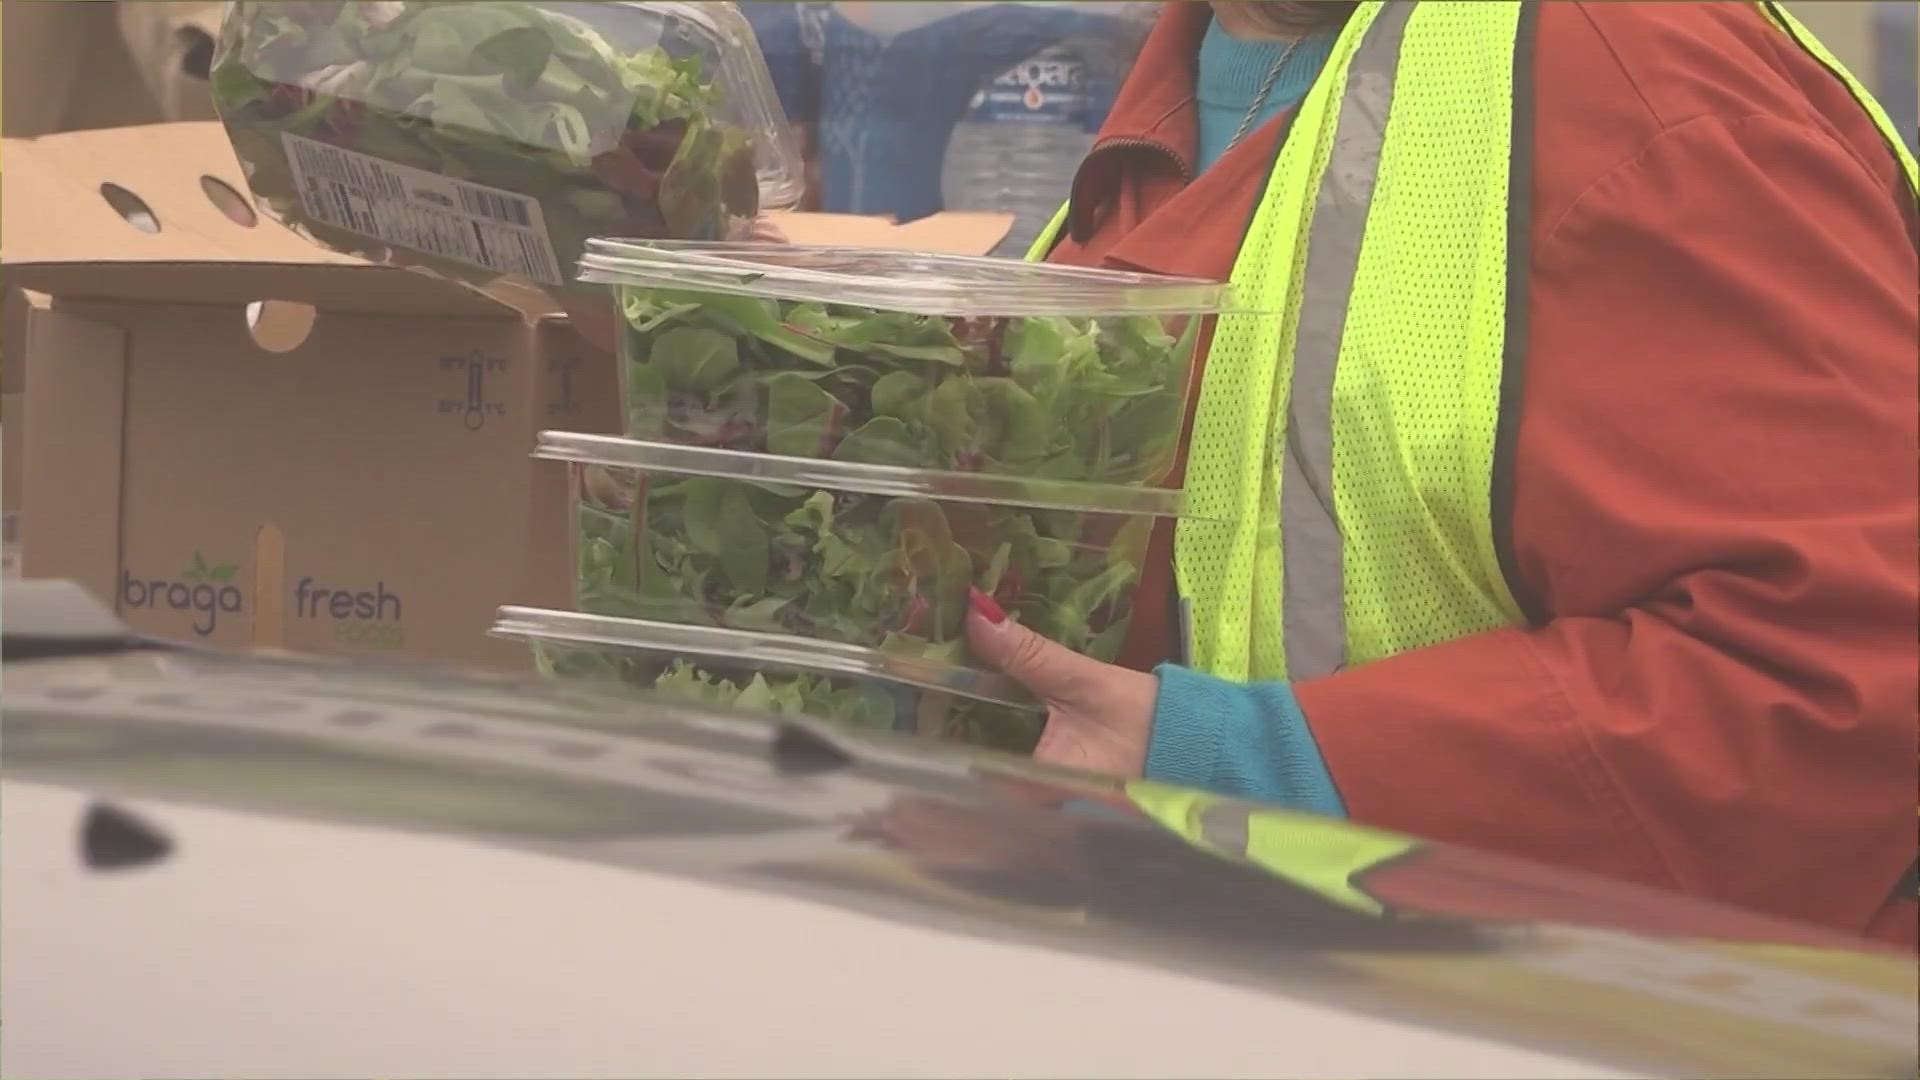 Due to the increased need from the ice storm, the Central Texas Food Bank is offering a second food distribution event to bridge the gap.